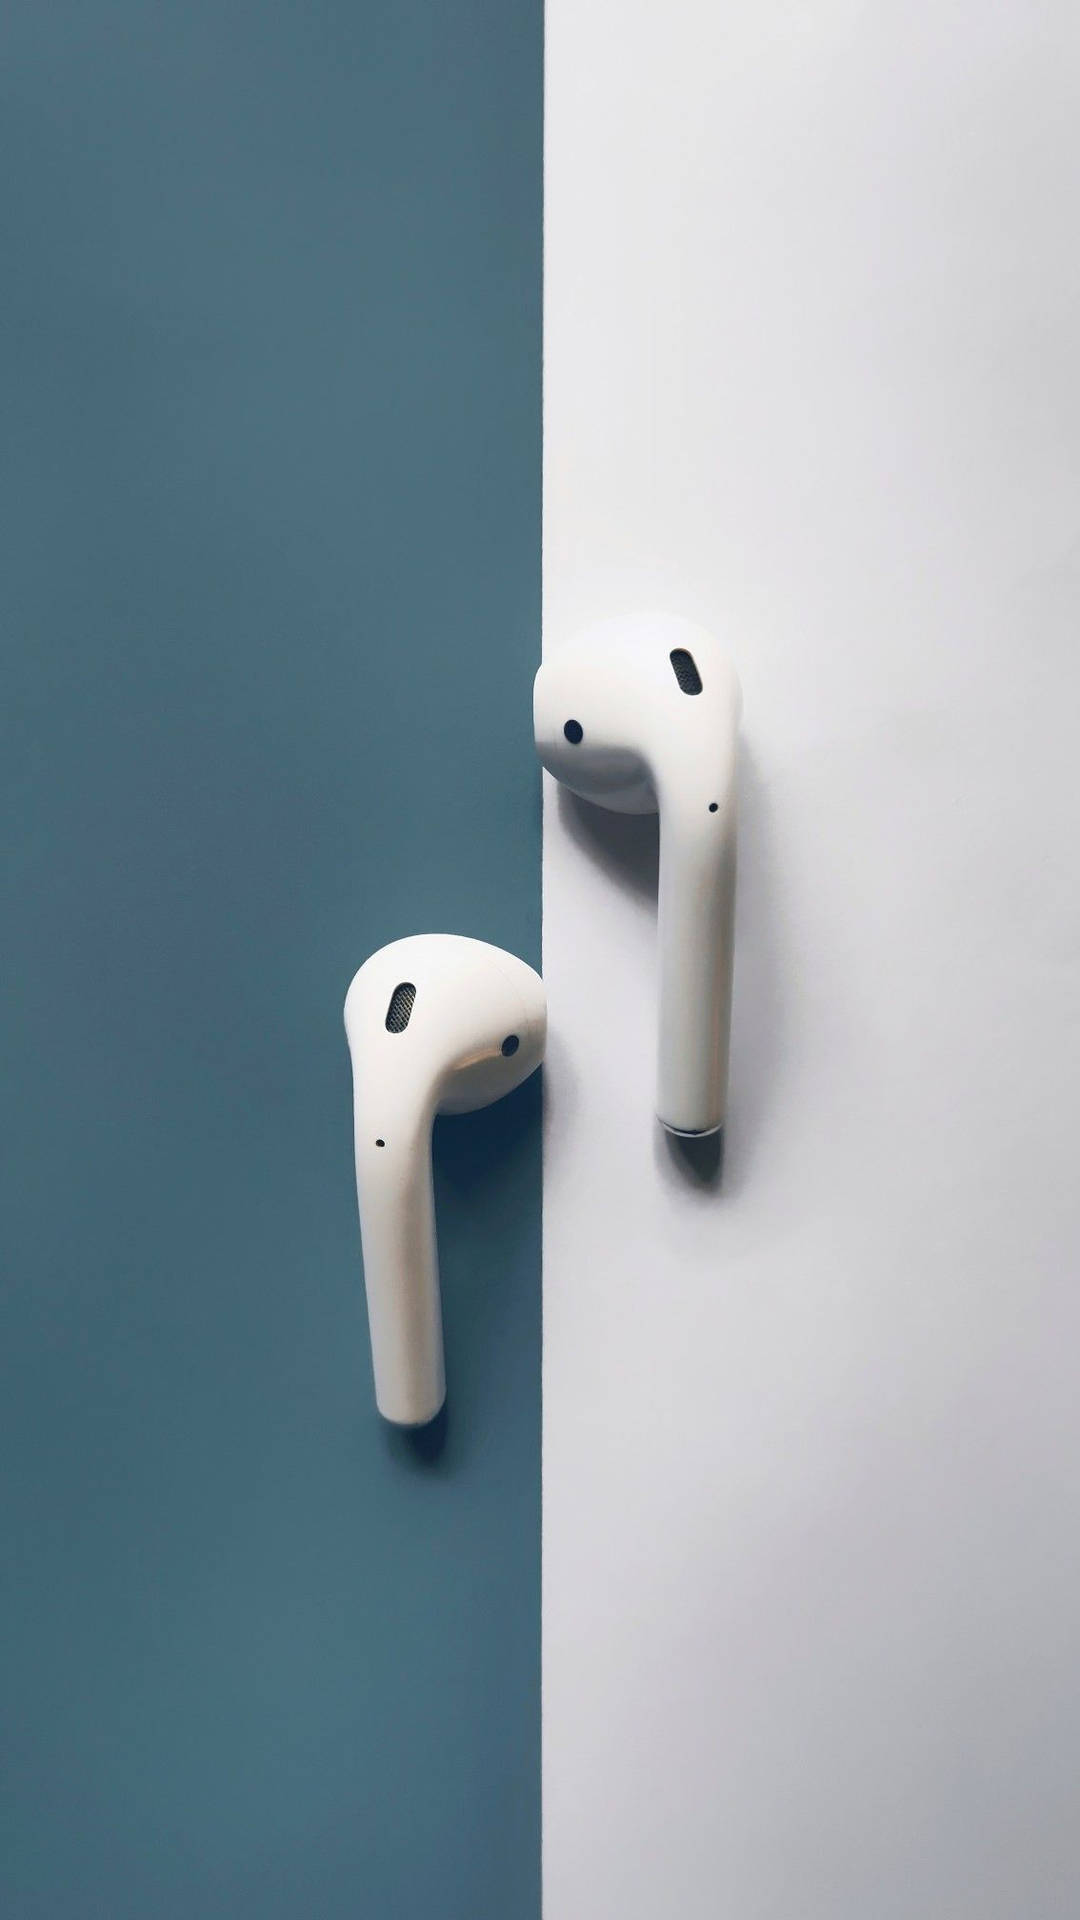 Top 999+ Airpods Wallpaper Full HD, 4K✅Free to Use